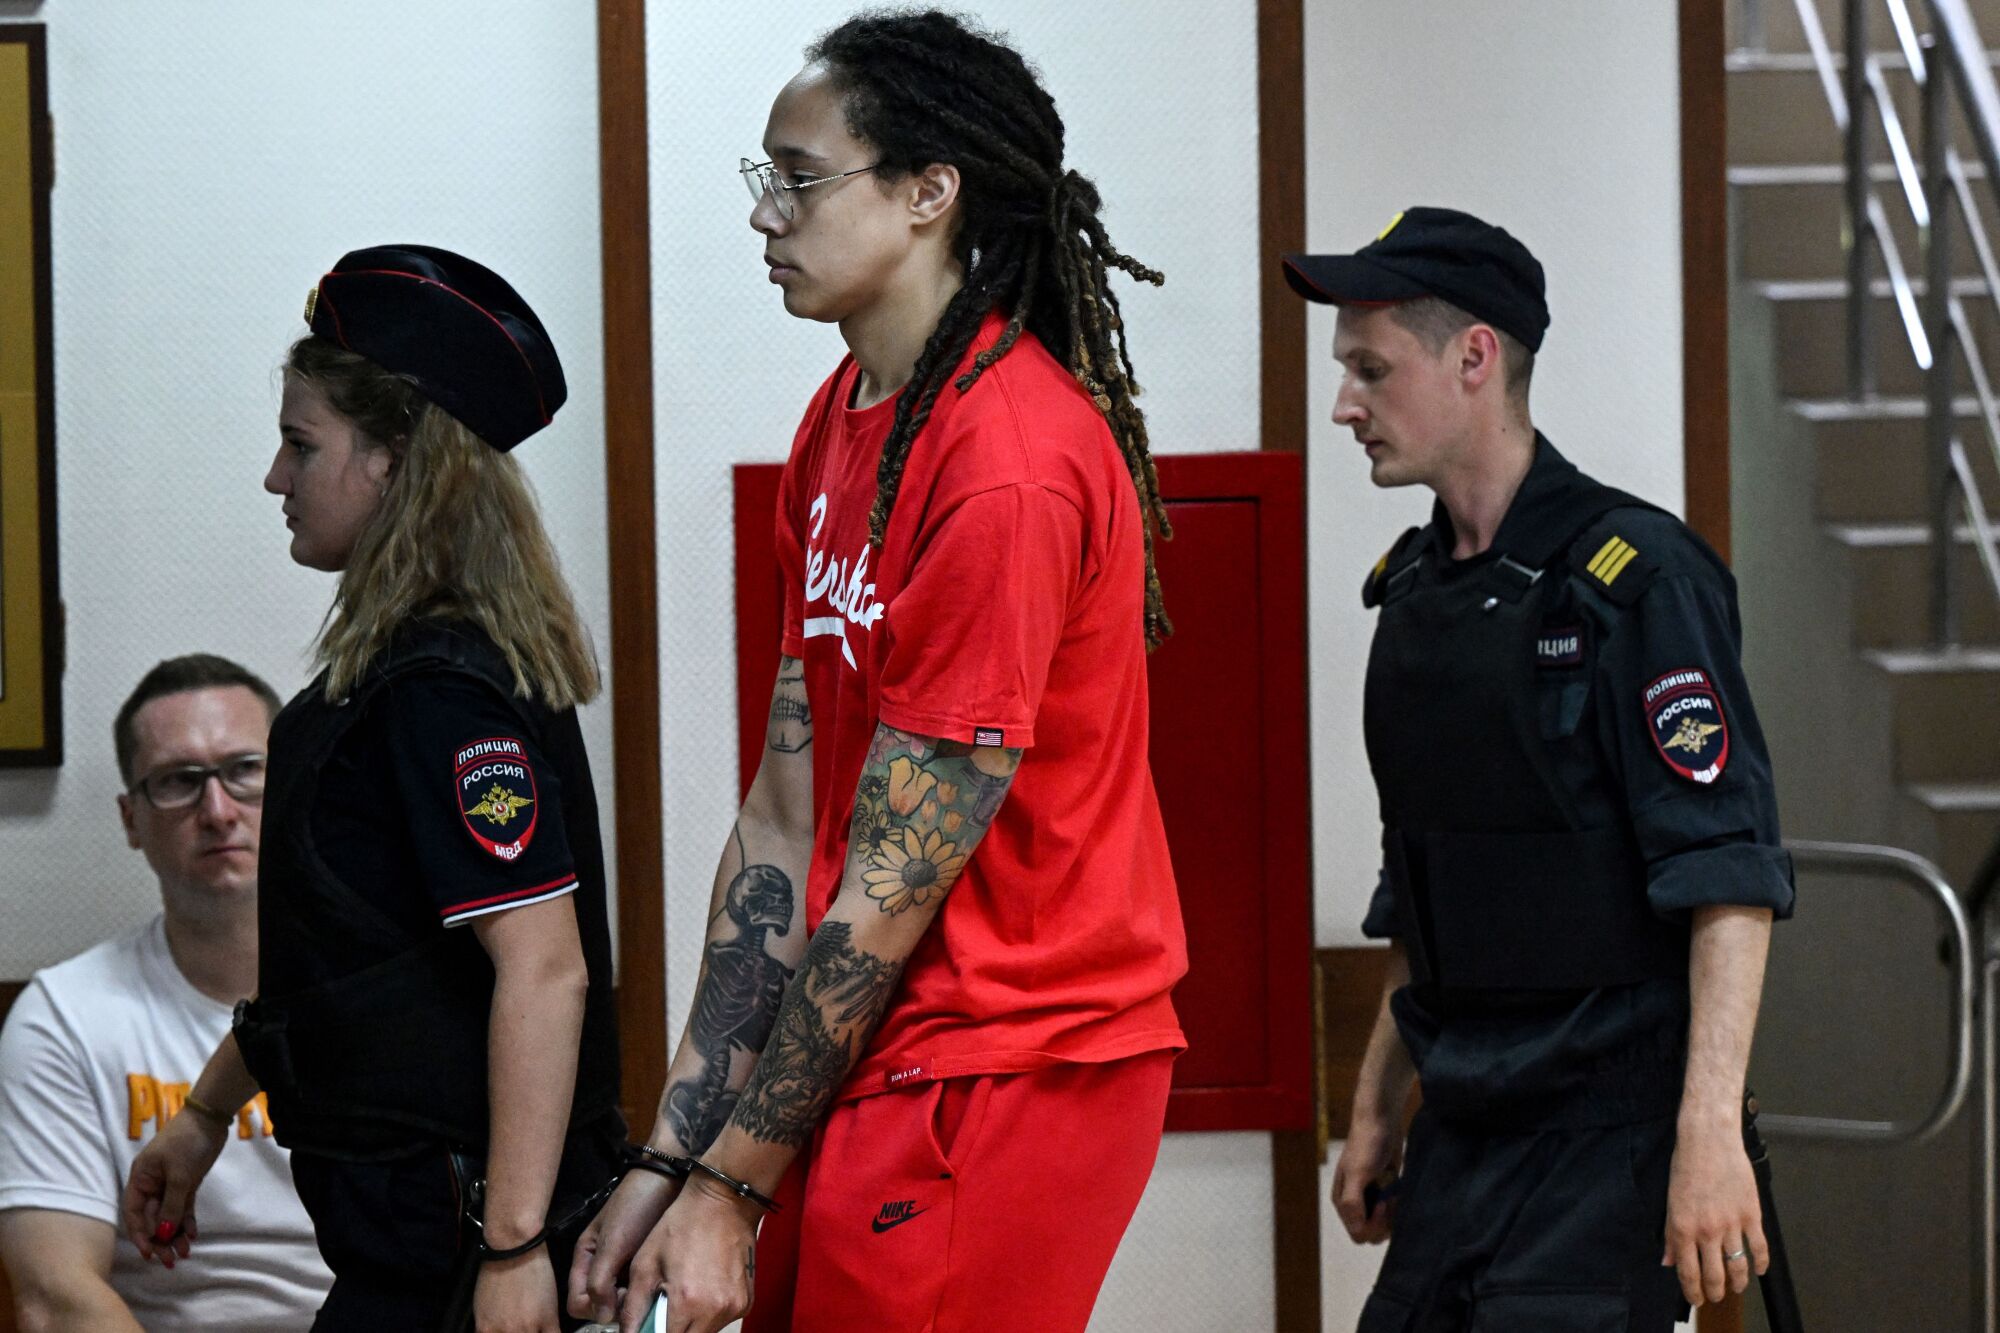 Griner, a two-time Olympic gold medallist and WNBA champion, was detained at Moscow airport in February.